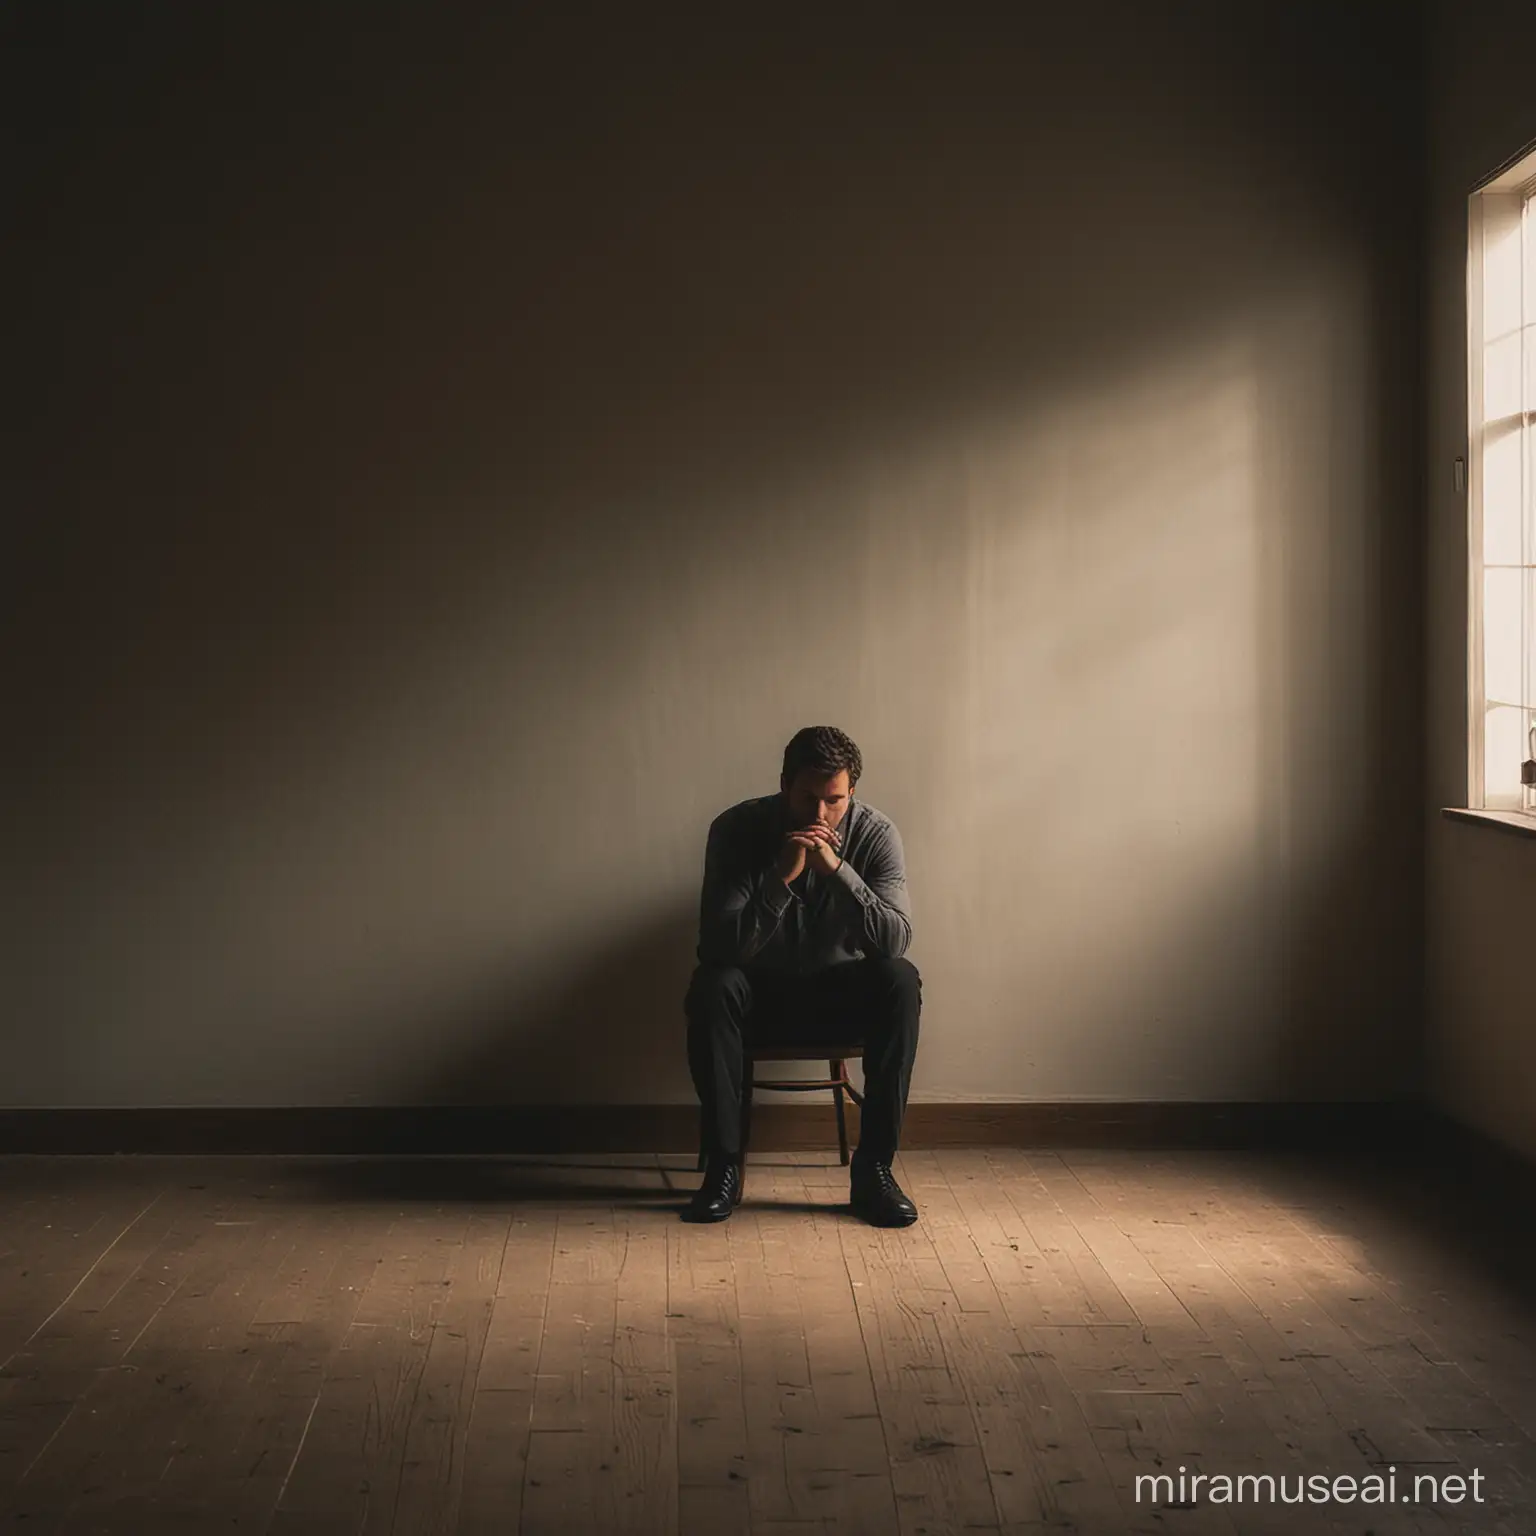 Contemplative Man Alone in Dimly Lit Room